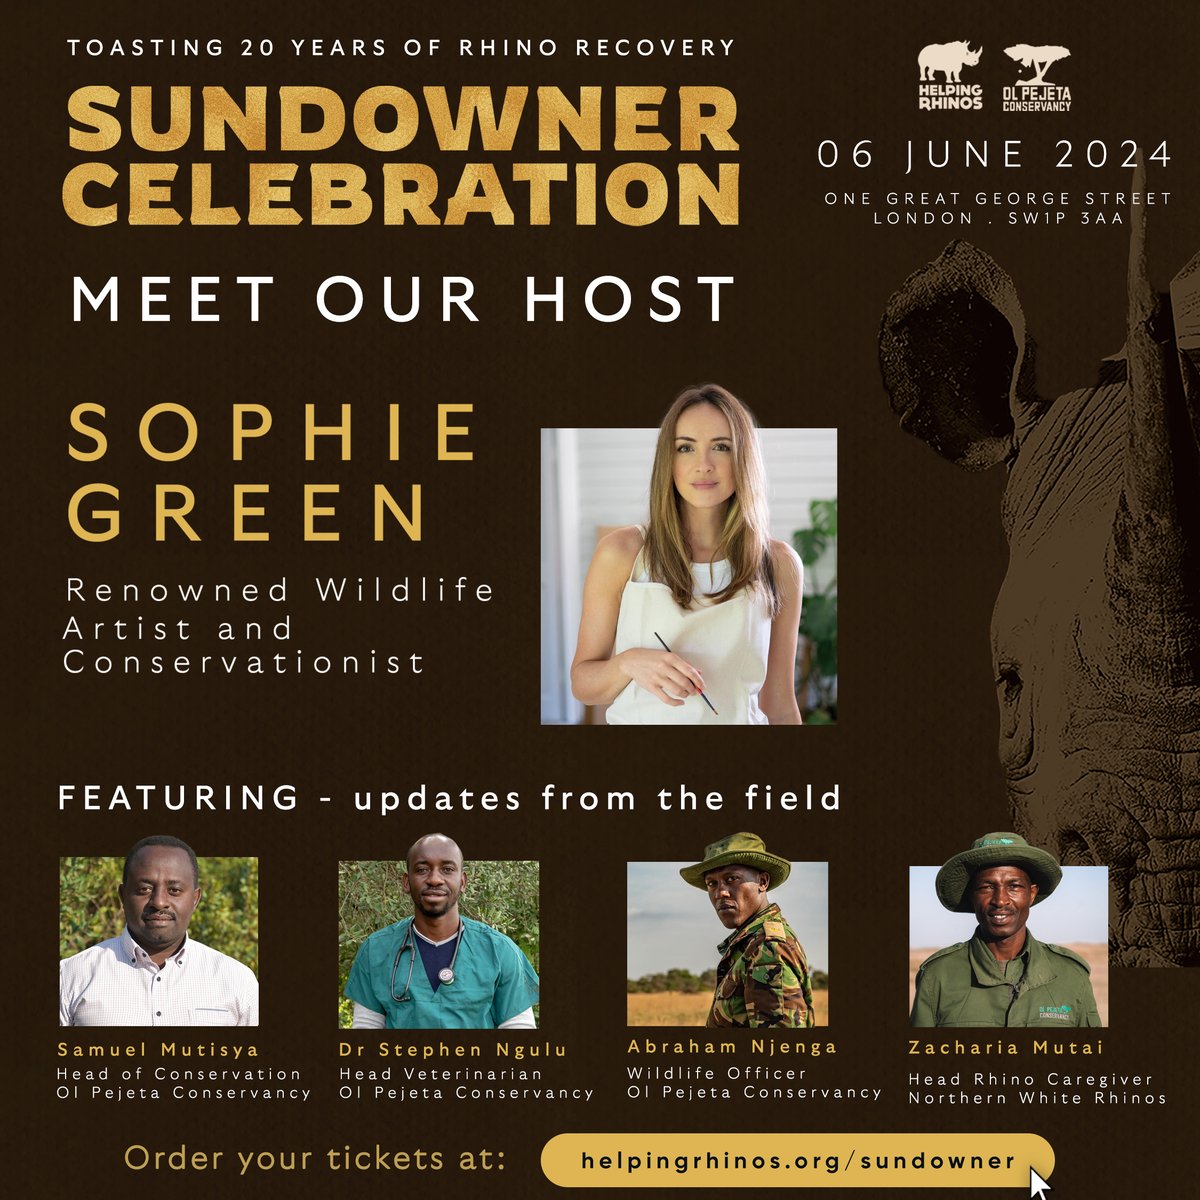 There's just THREE WEEKS until the Sundowner Celebration and we are thrilled to announce that renowned wildlife artist and conservationist @sophiegreenart will be hosting the event 🎉 Get your tickets to join us & @OlPejeta on Thursday 6th June in London⬇️ ww2.emma-live.com/helpingrhinos/…